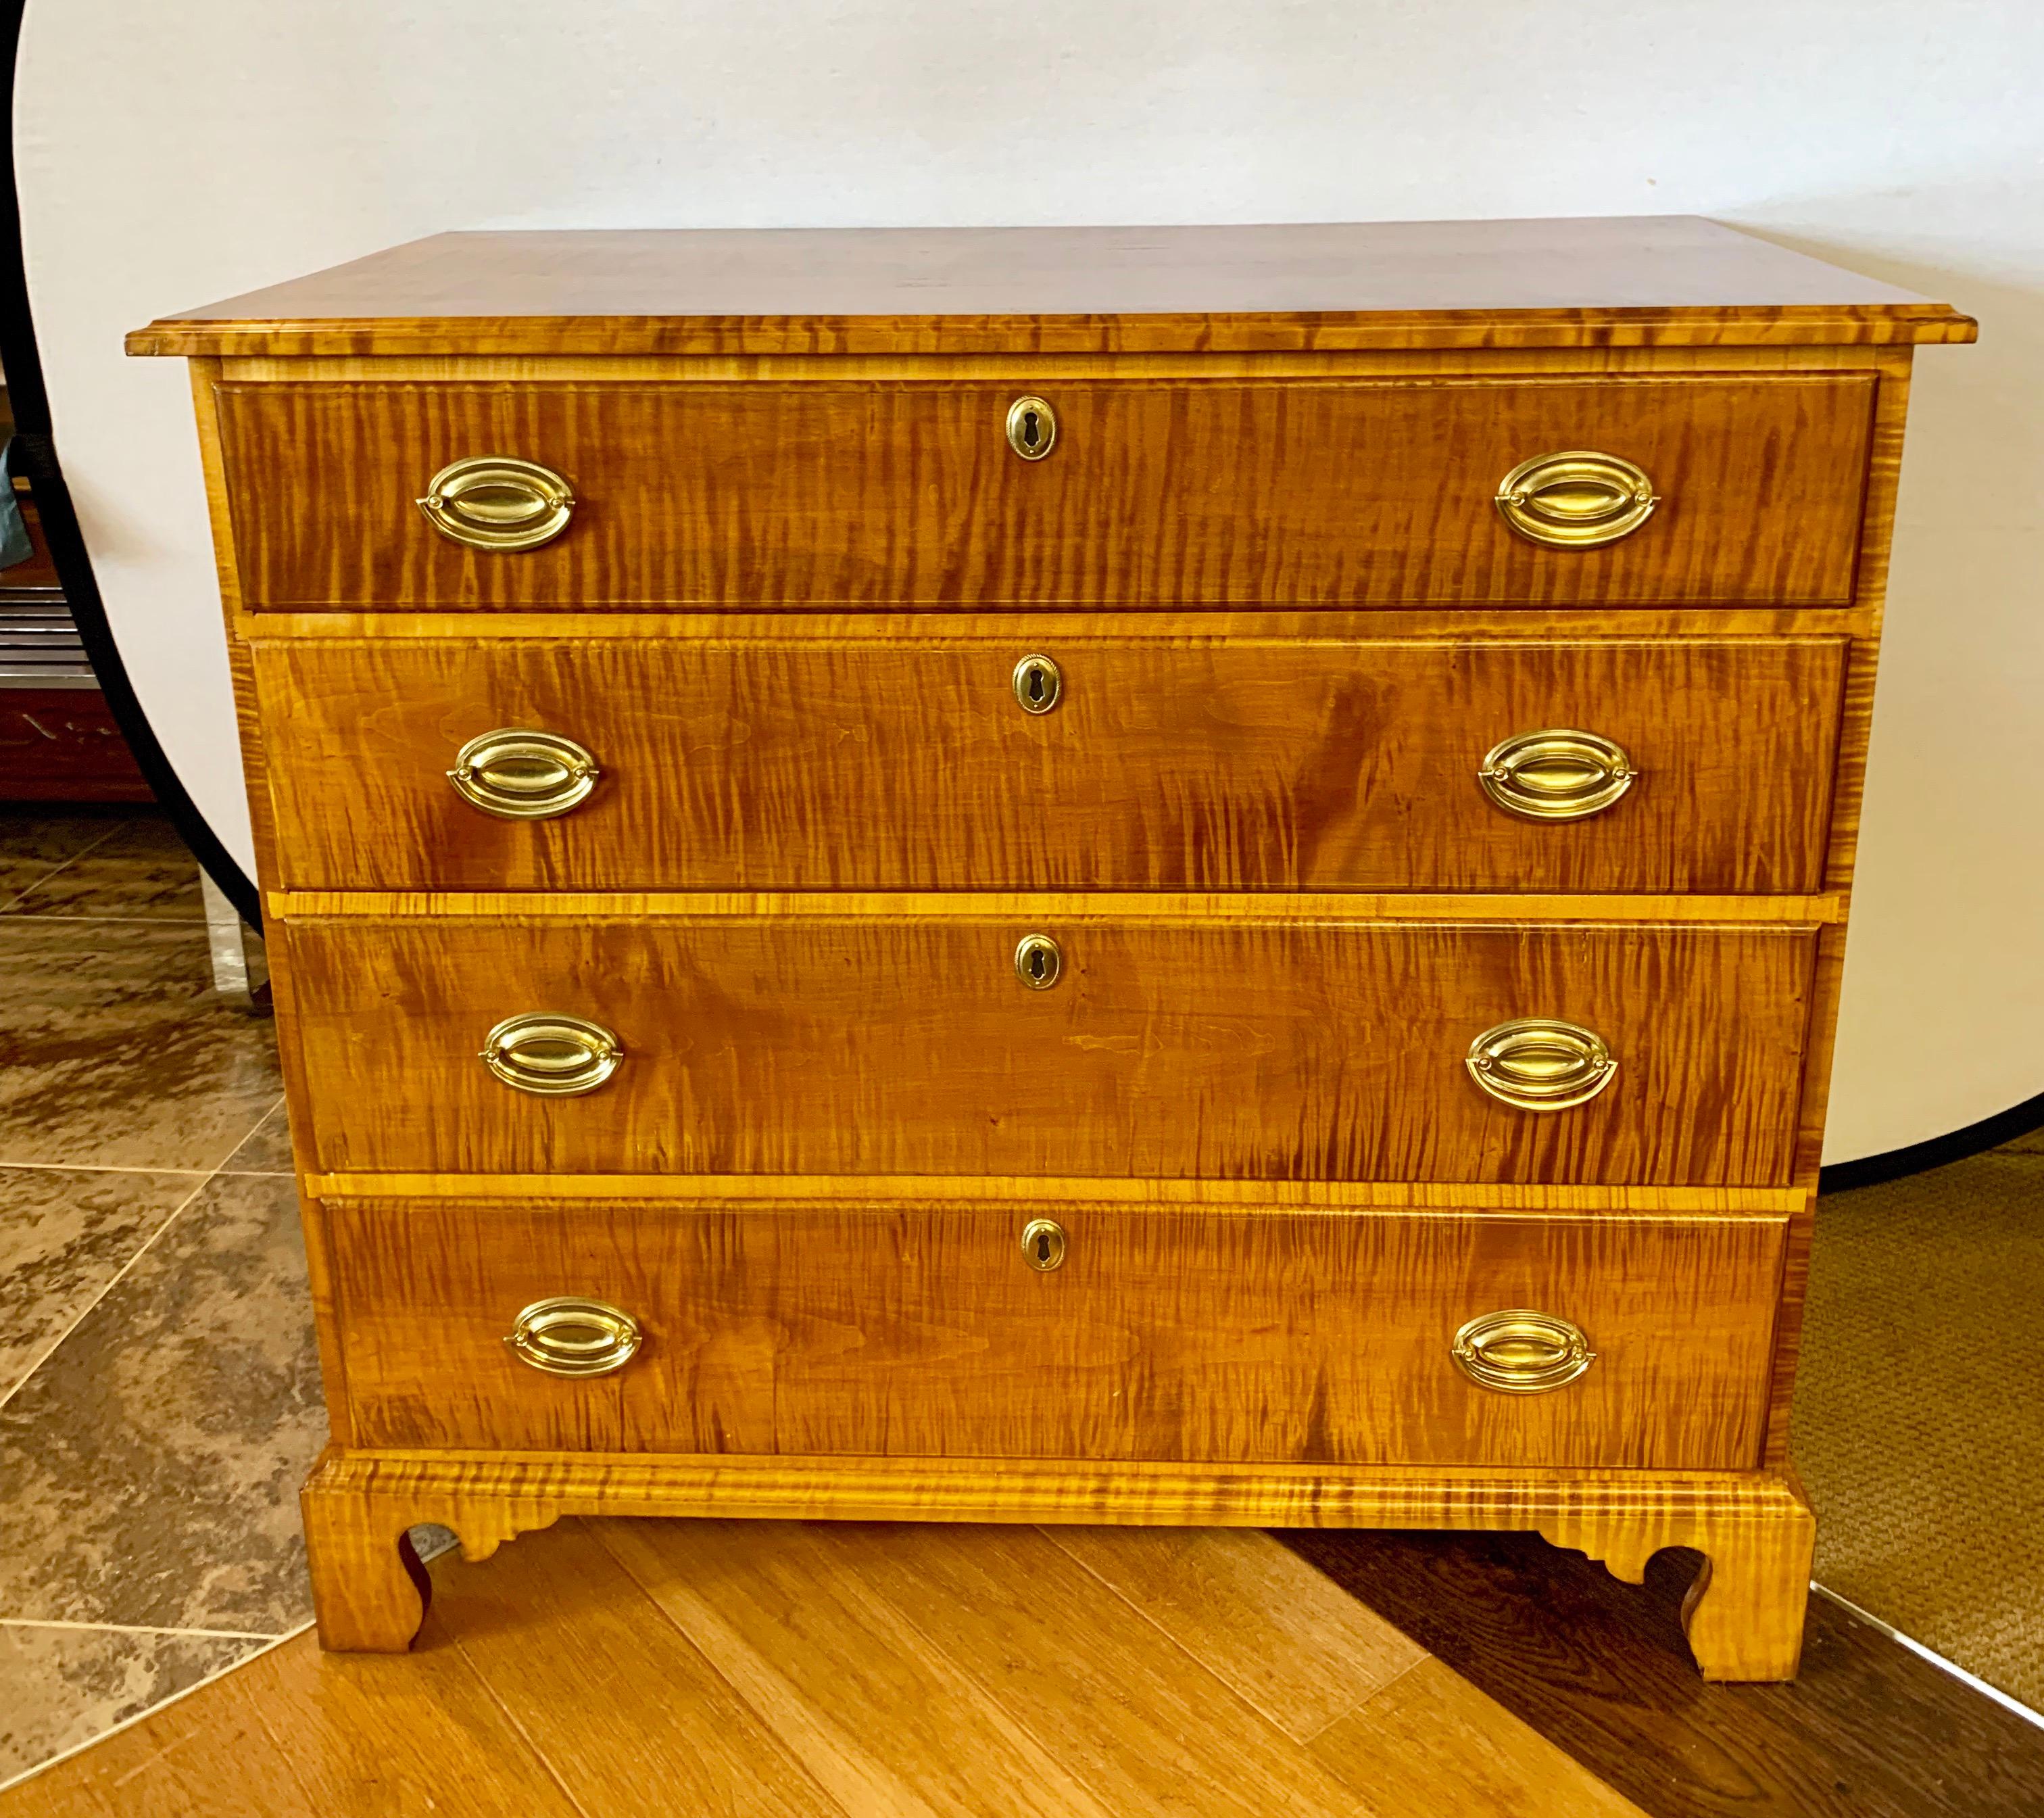 Stunning four drawer dresser or chest of drawers by Charles Dewey, Bennington, Vermont. Not everyone can own a Dewey; how about you?